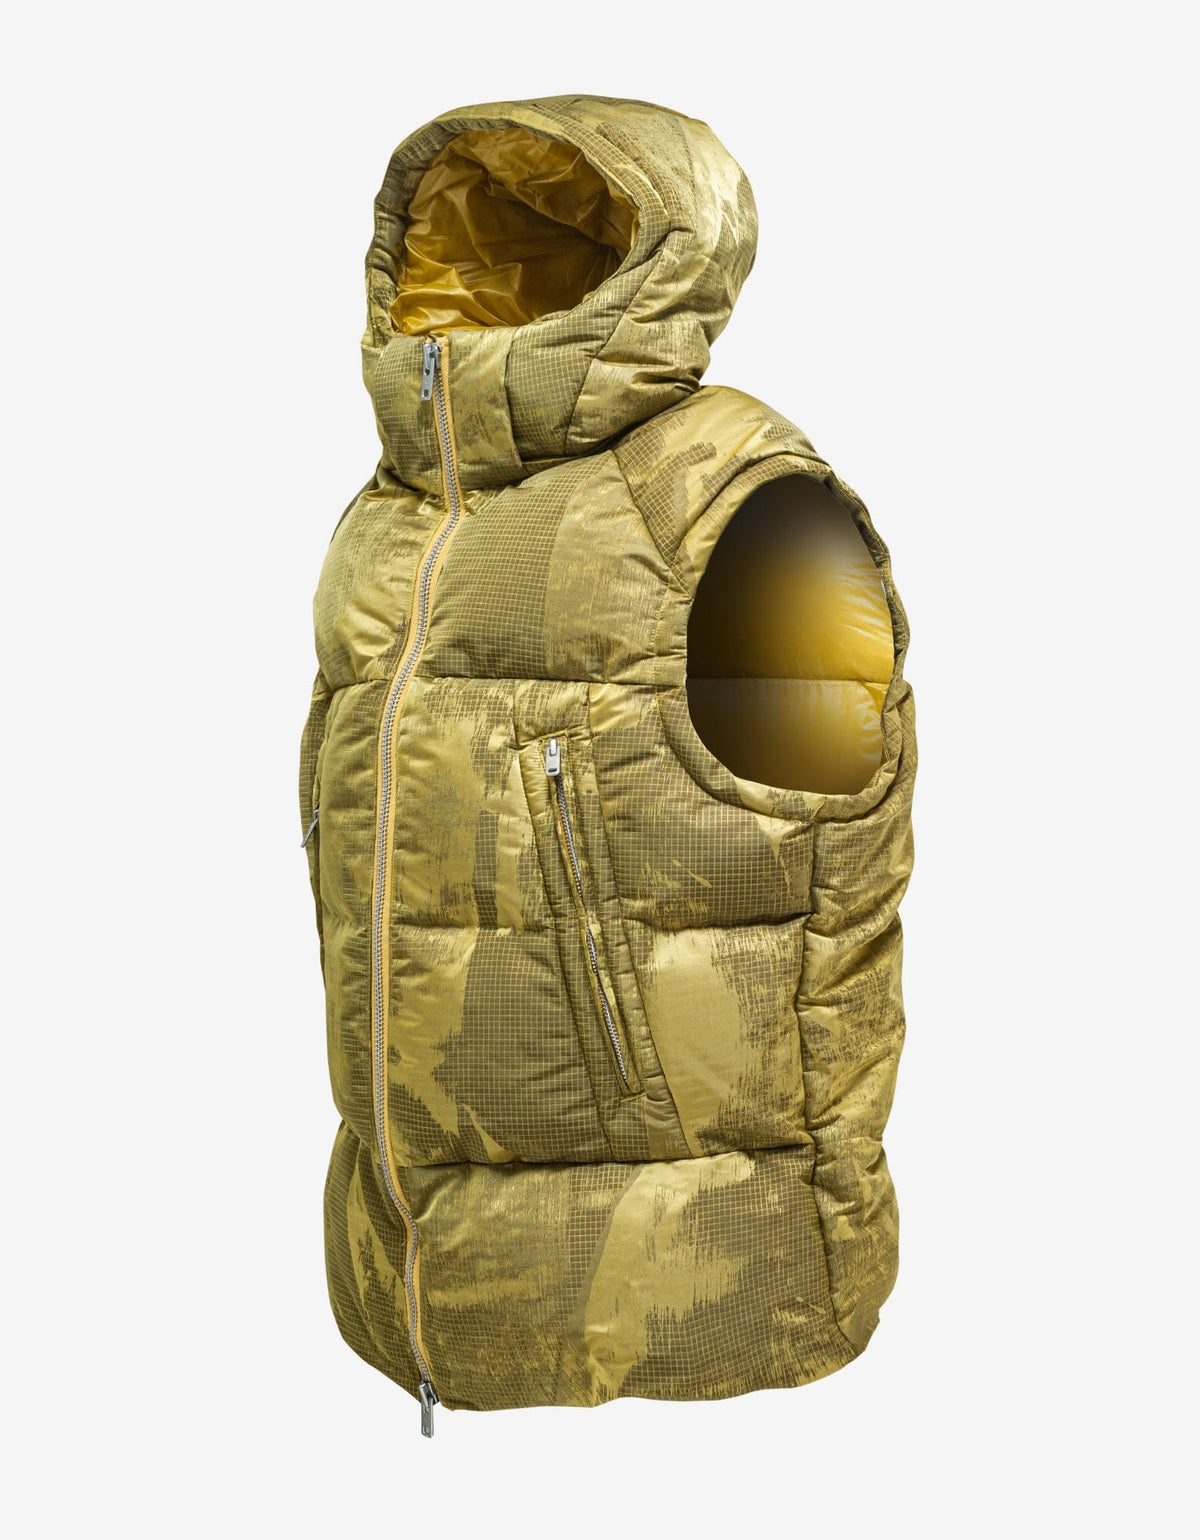 Y-3 Yellow Graphic Gilet